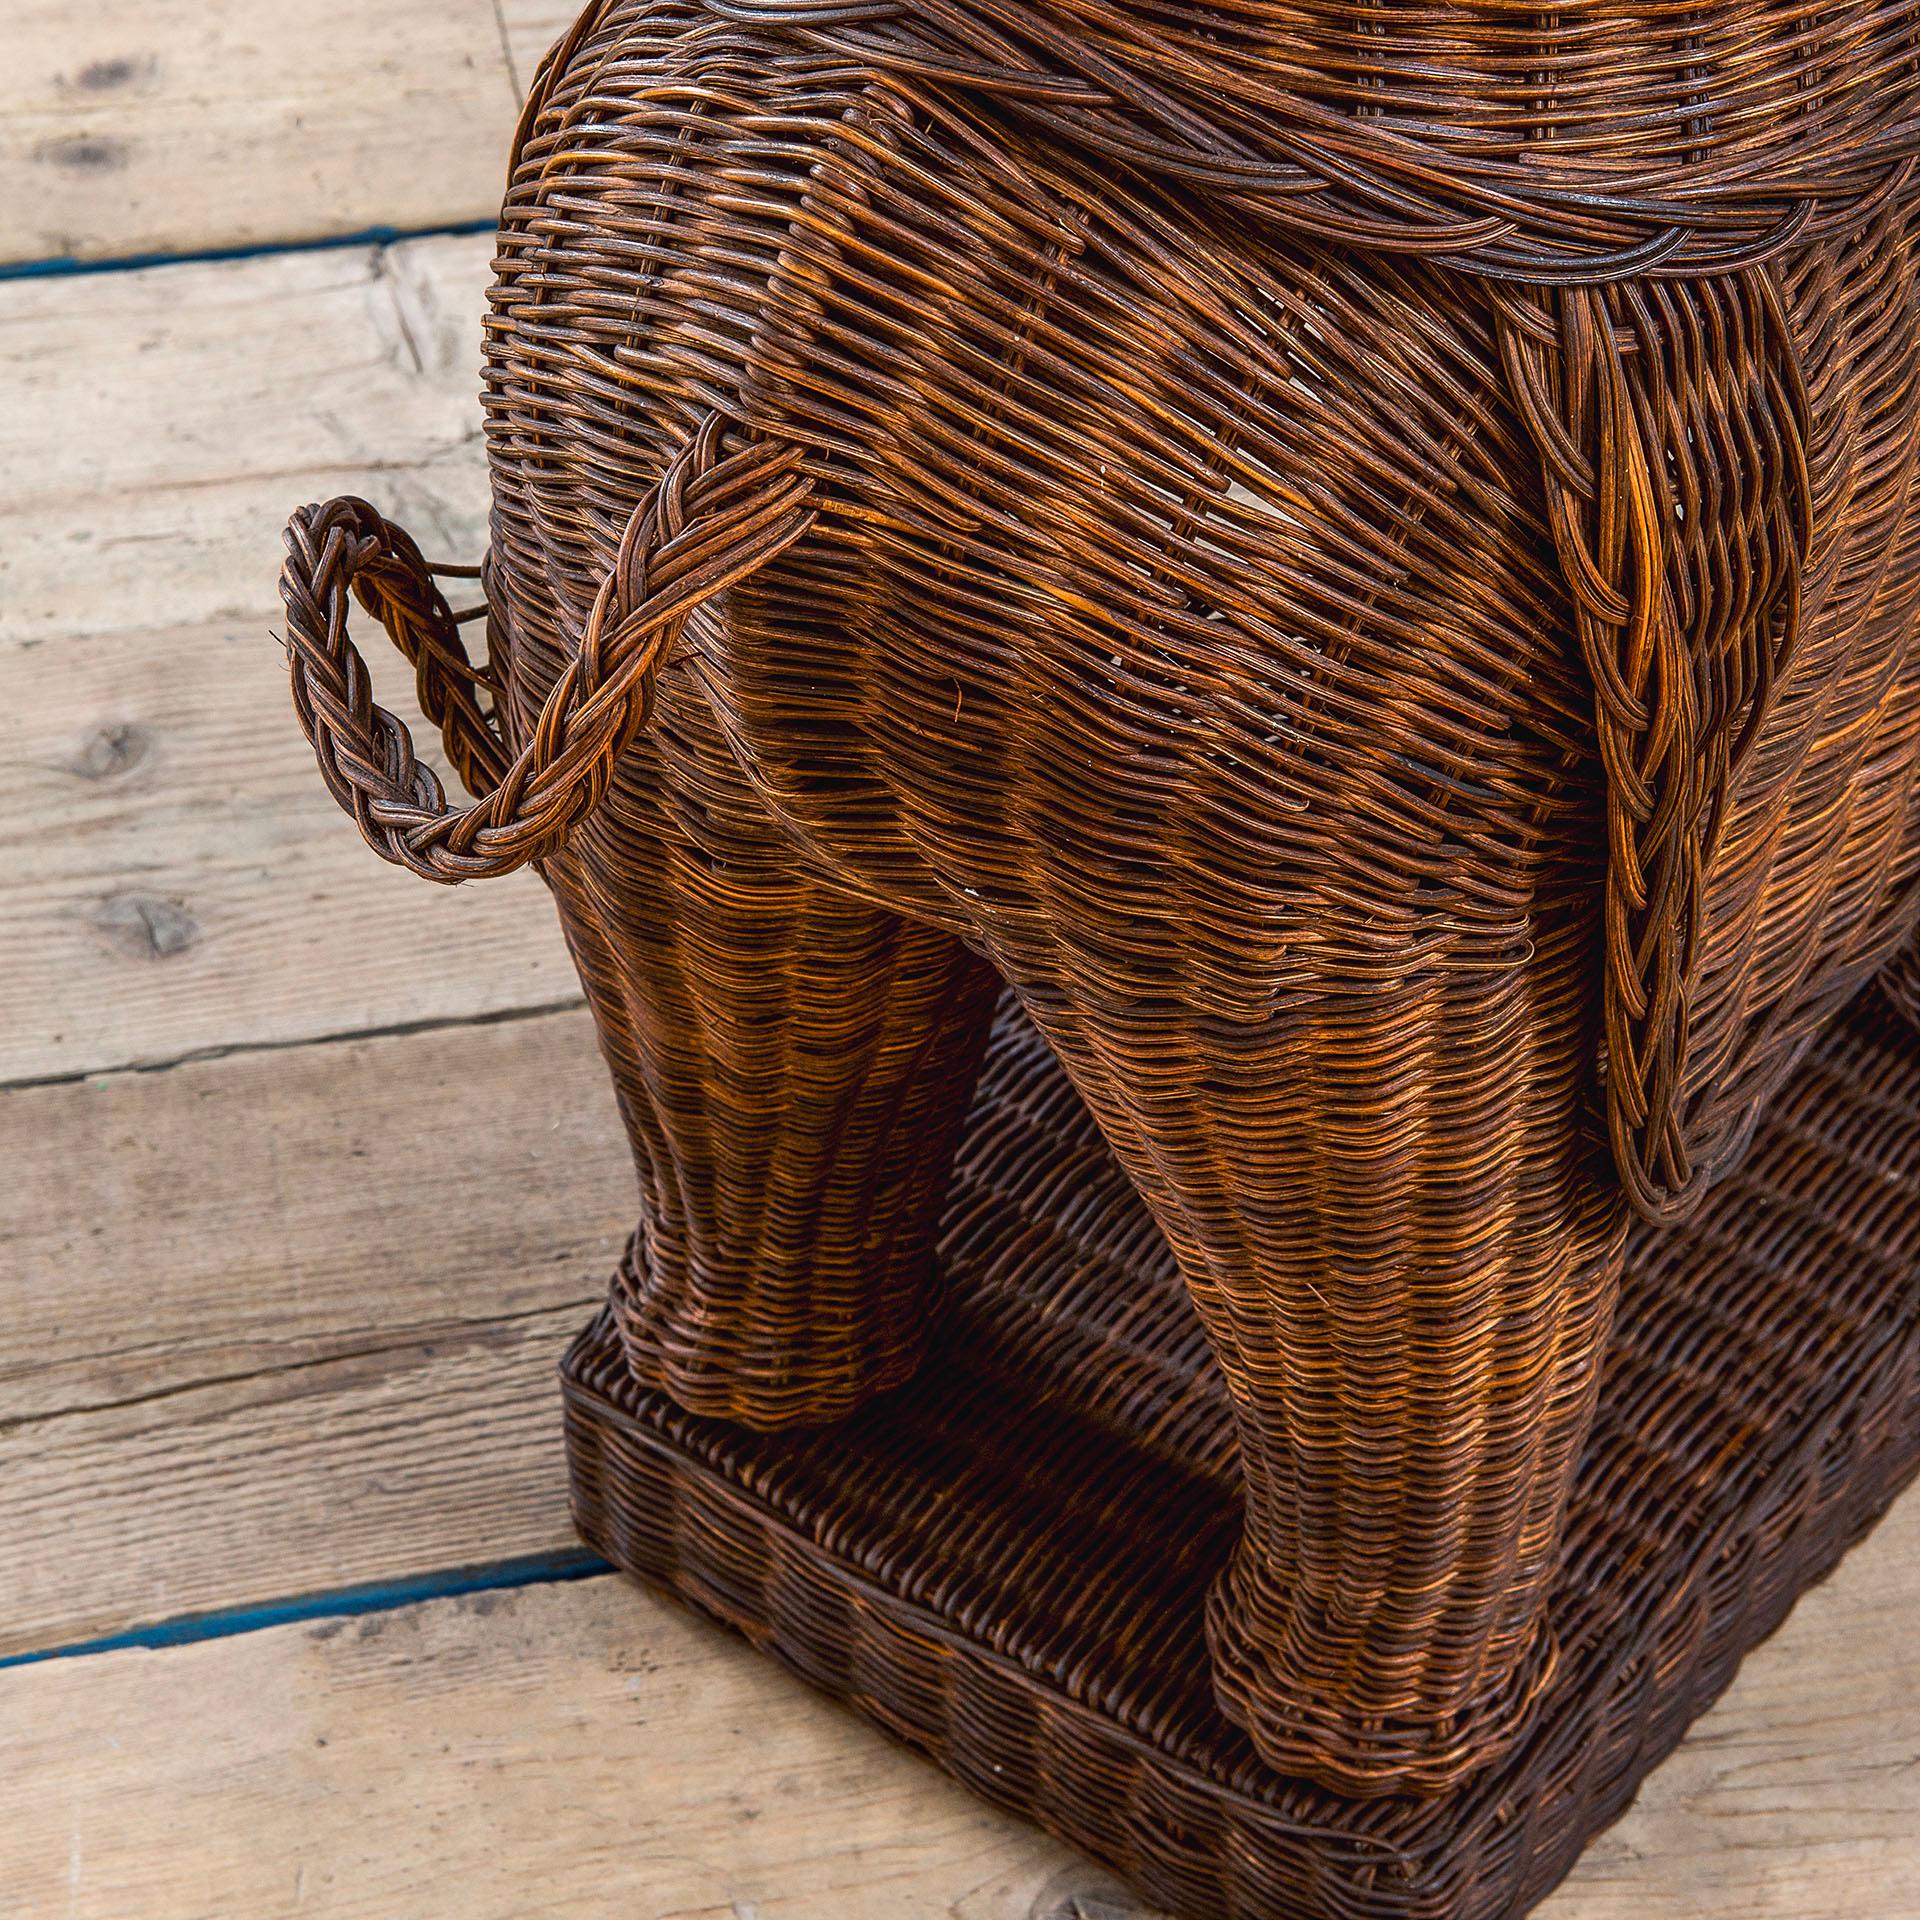 Italian 20th Century Vivai del Sud Elephant-Shaped Table in Rattan, 70s For Sale